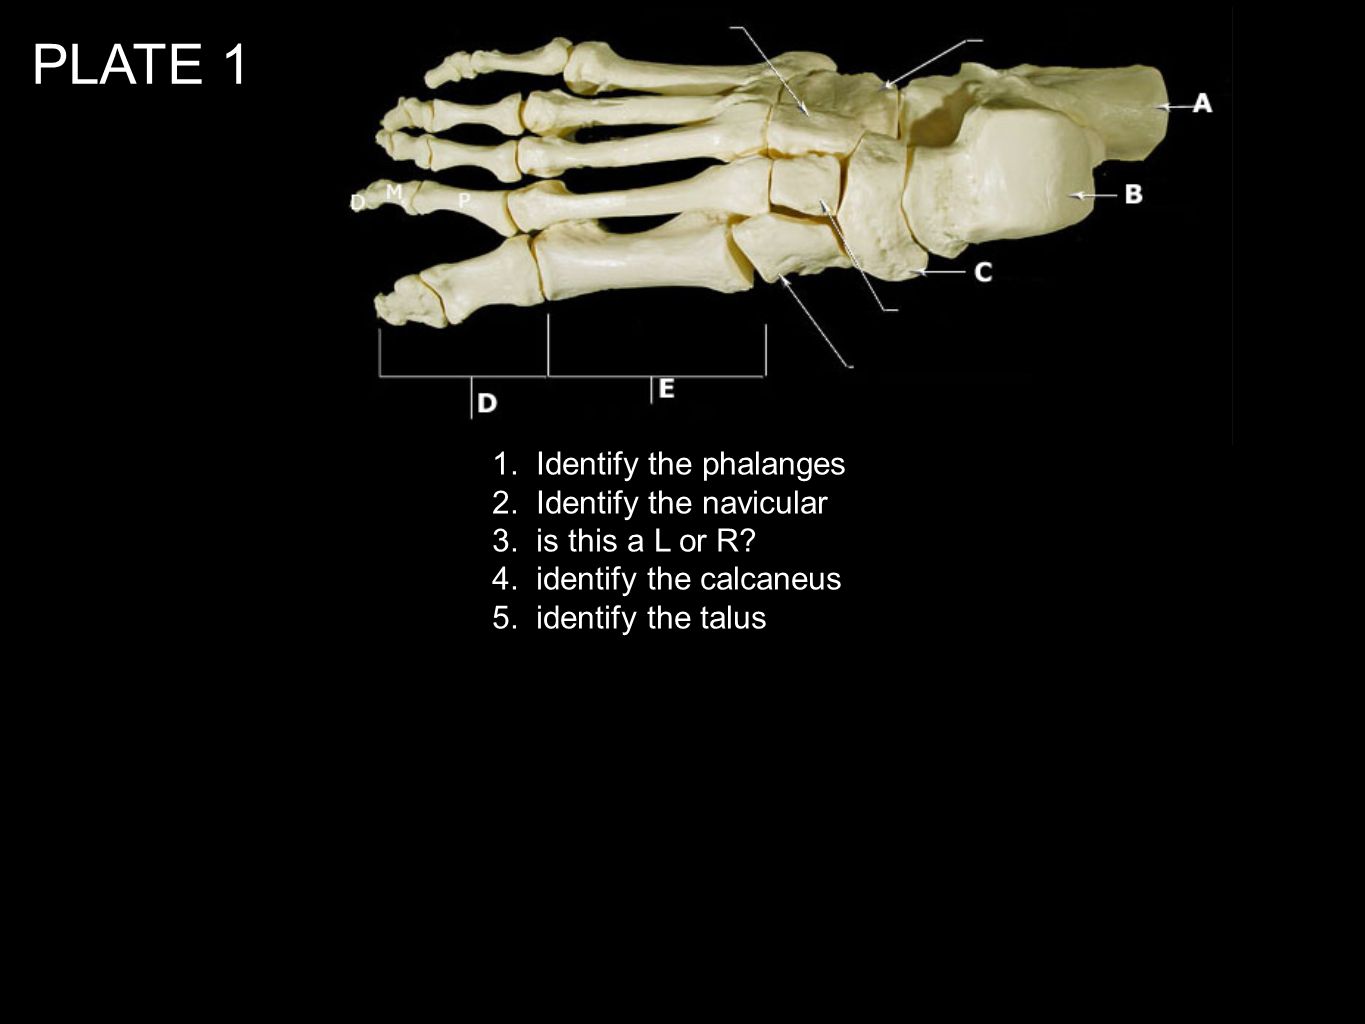 PLATE 1 1. Identify the phalanges 2. Identify the navicular